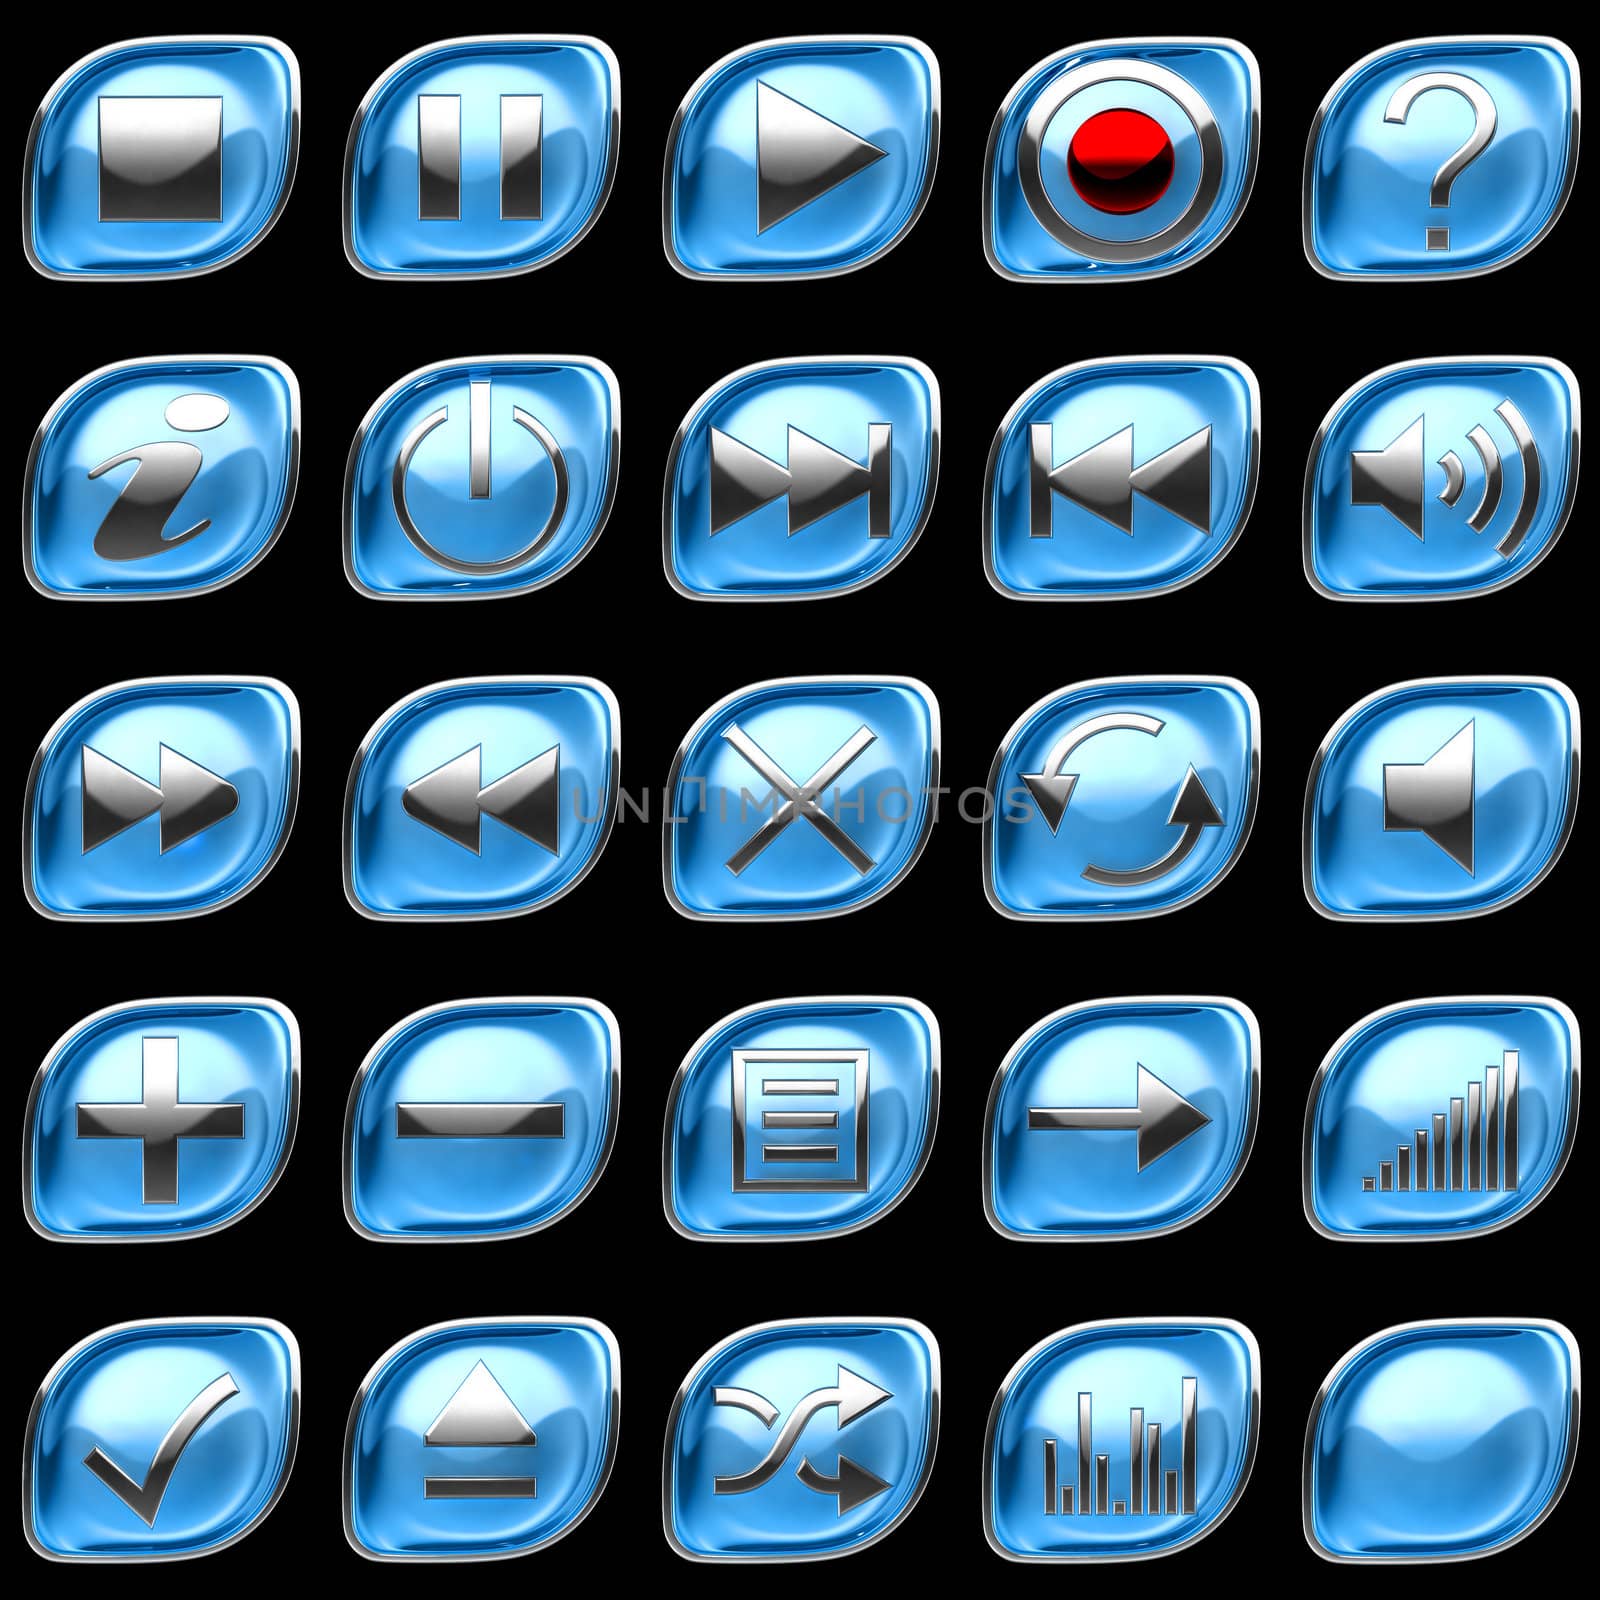 Blue pushed Control panel buttons or icons isolated on black